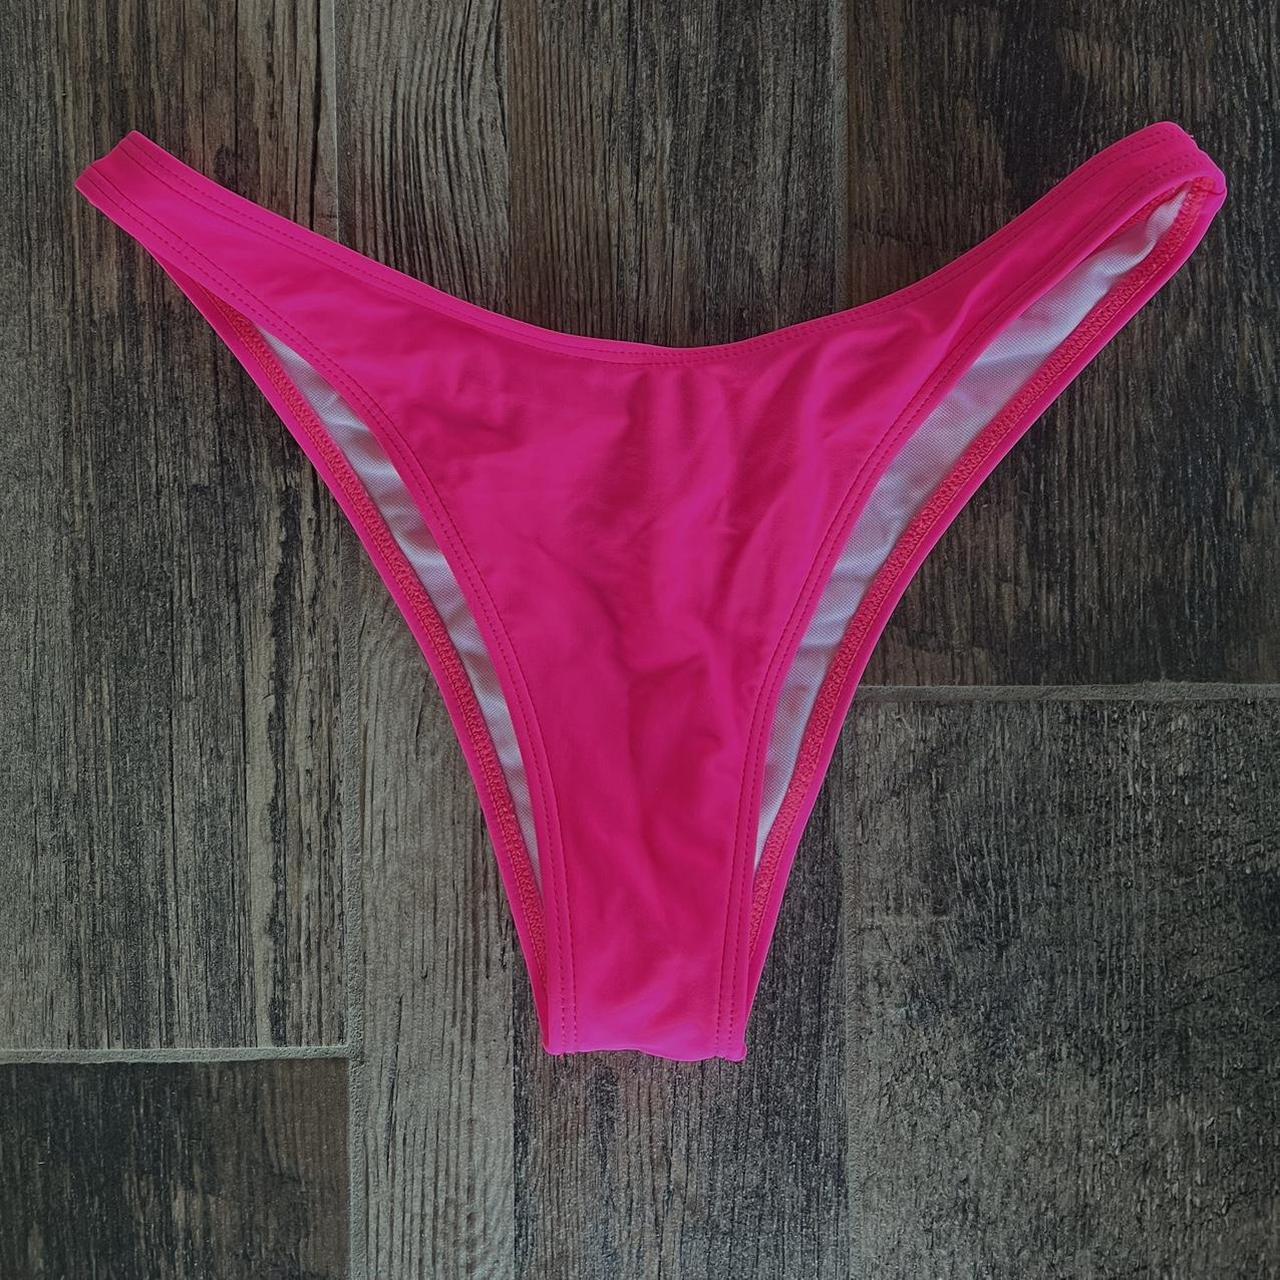 Hot pink bikini with padded bra top and tie side - Depop